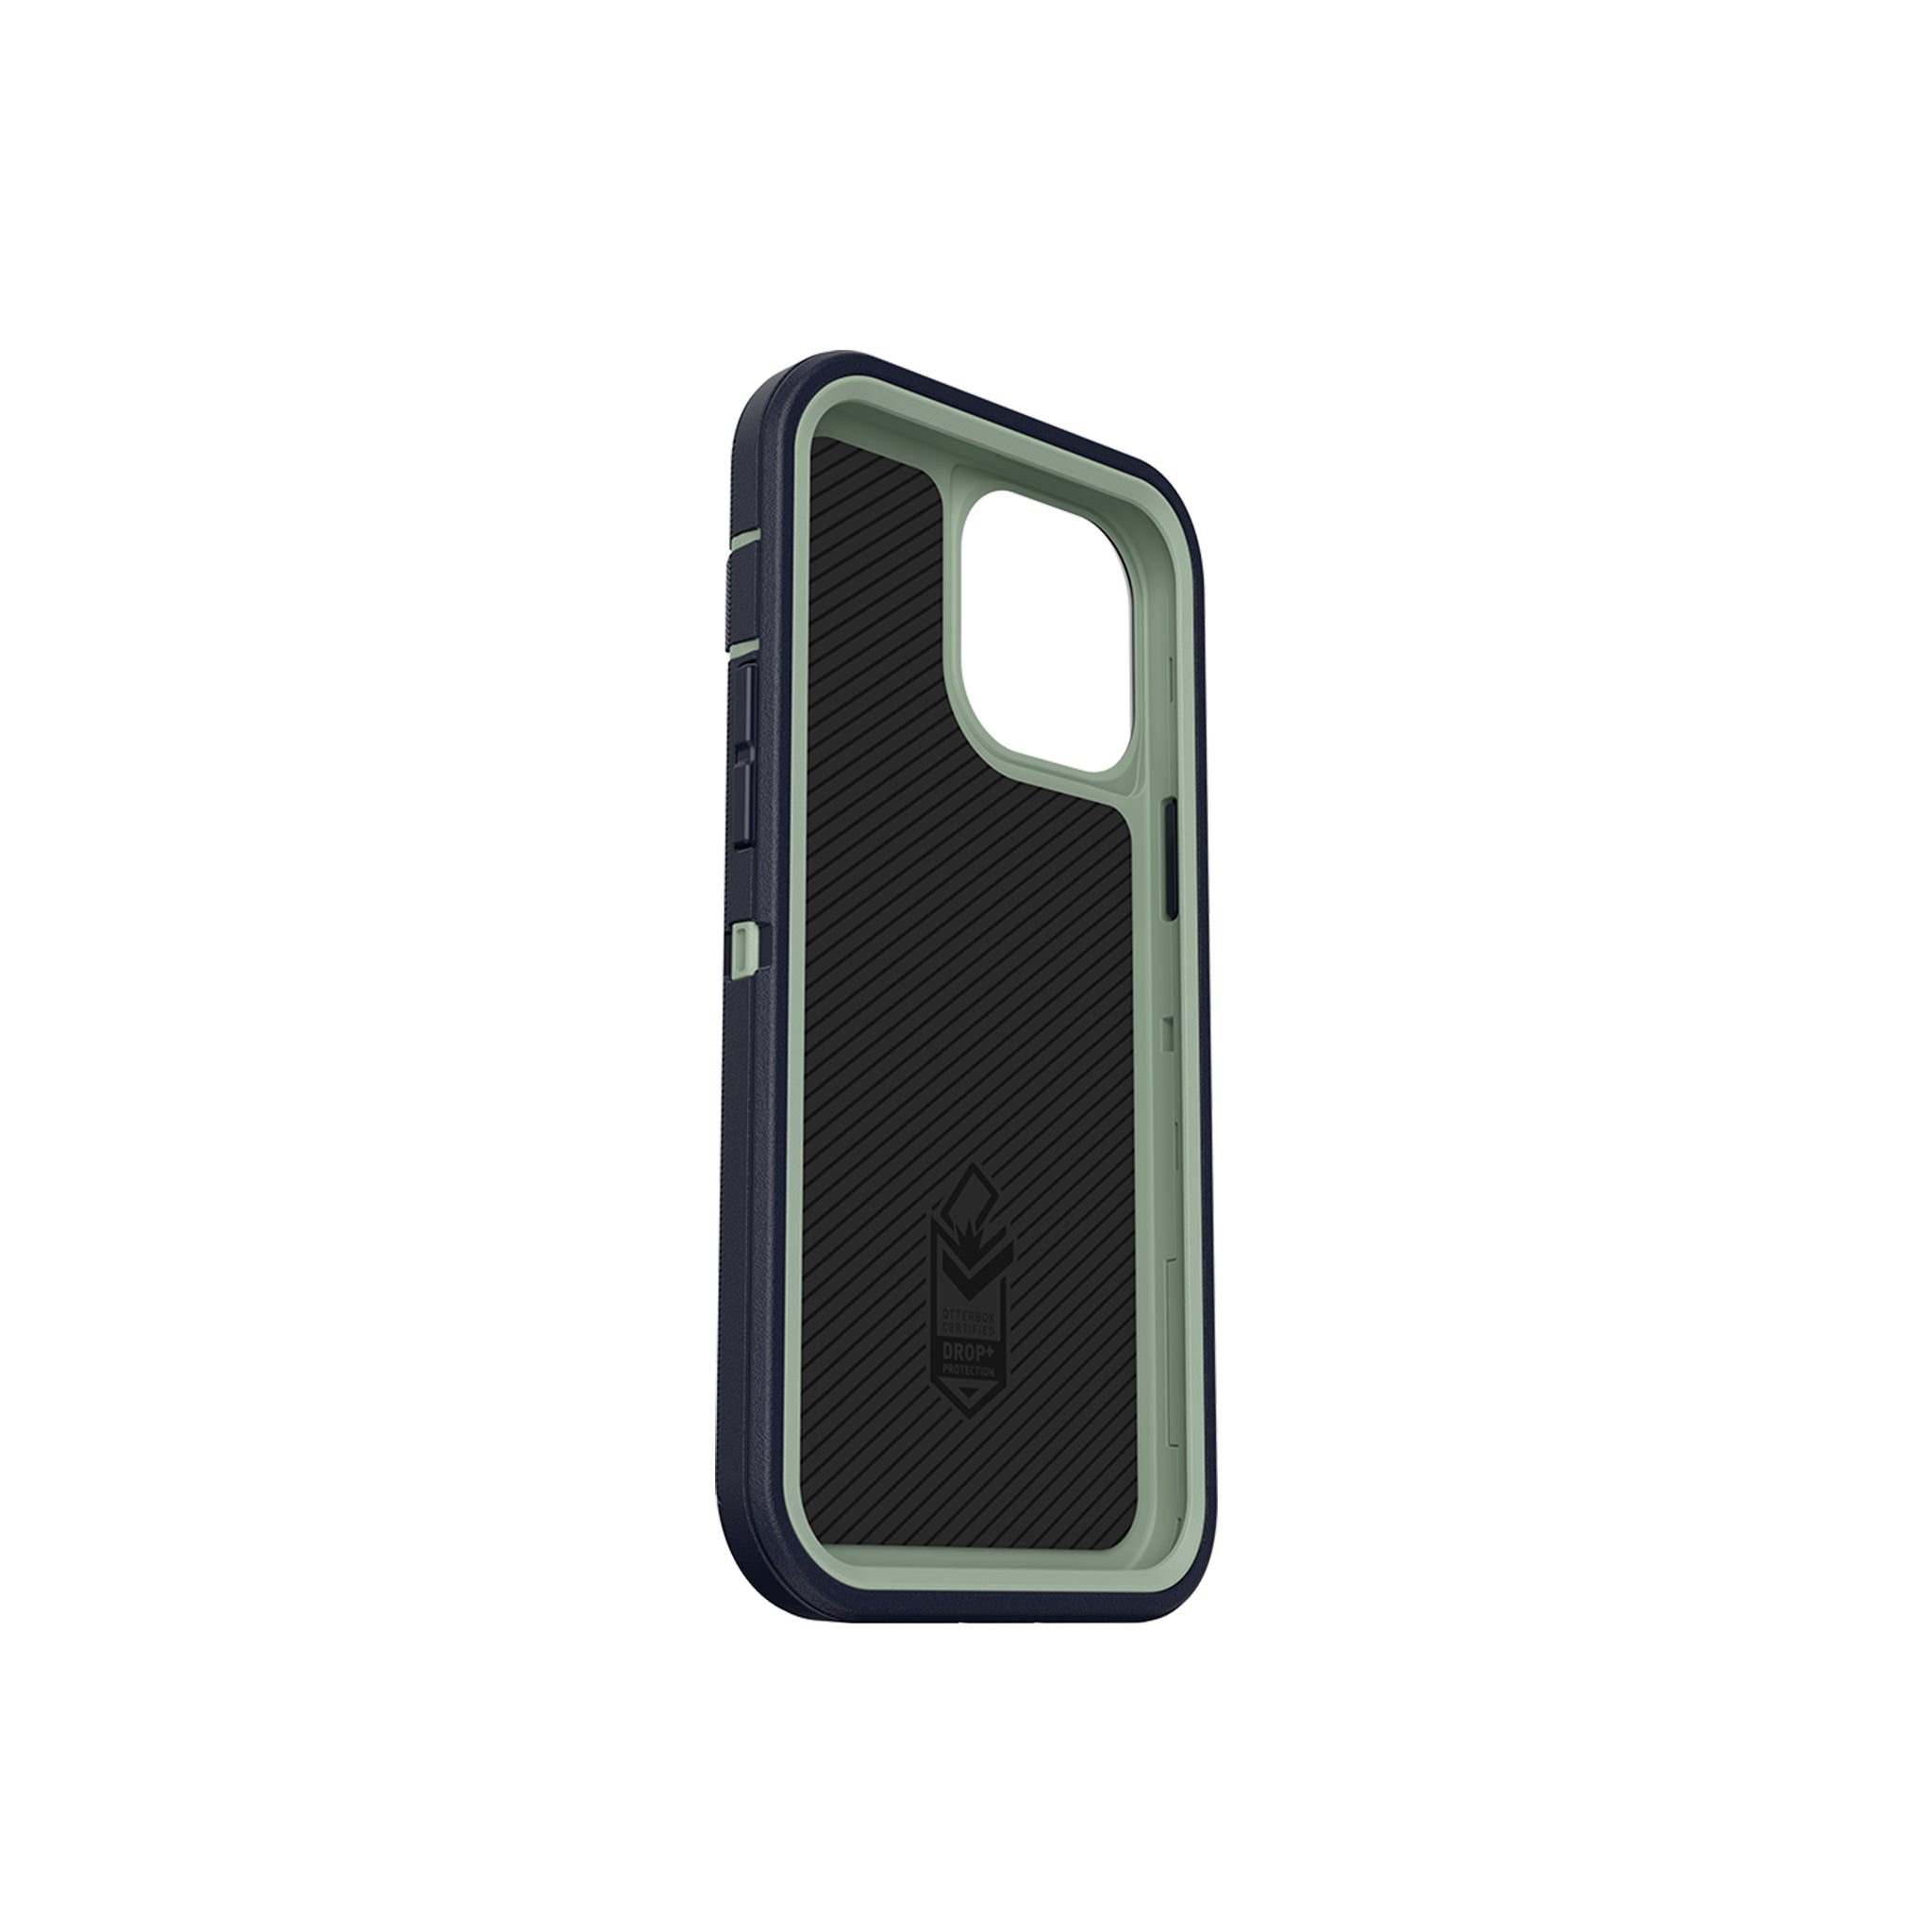 OtterBox - Defender for iPhone 12 Pro Max - Varsity Blues